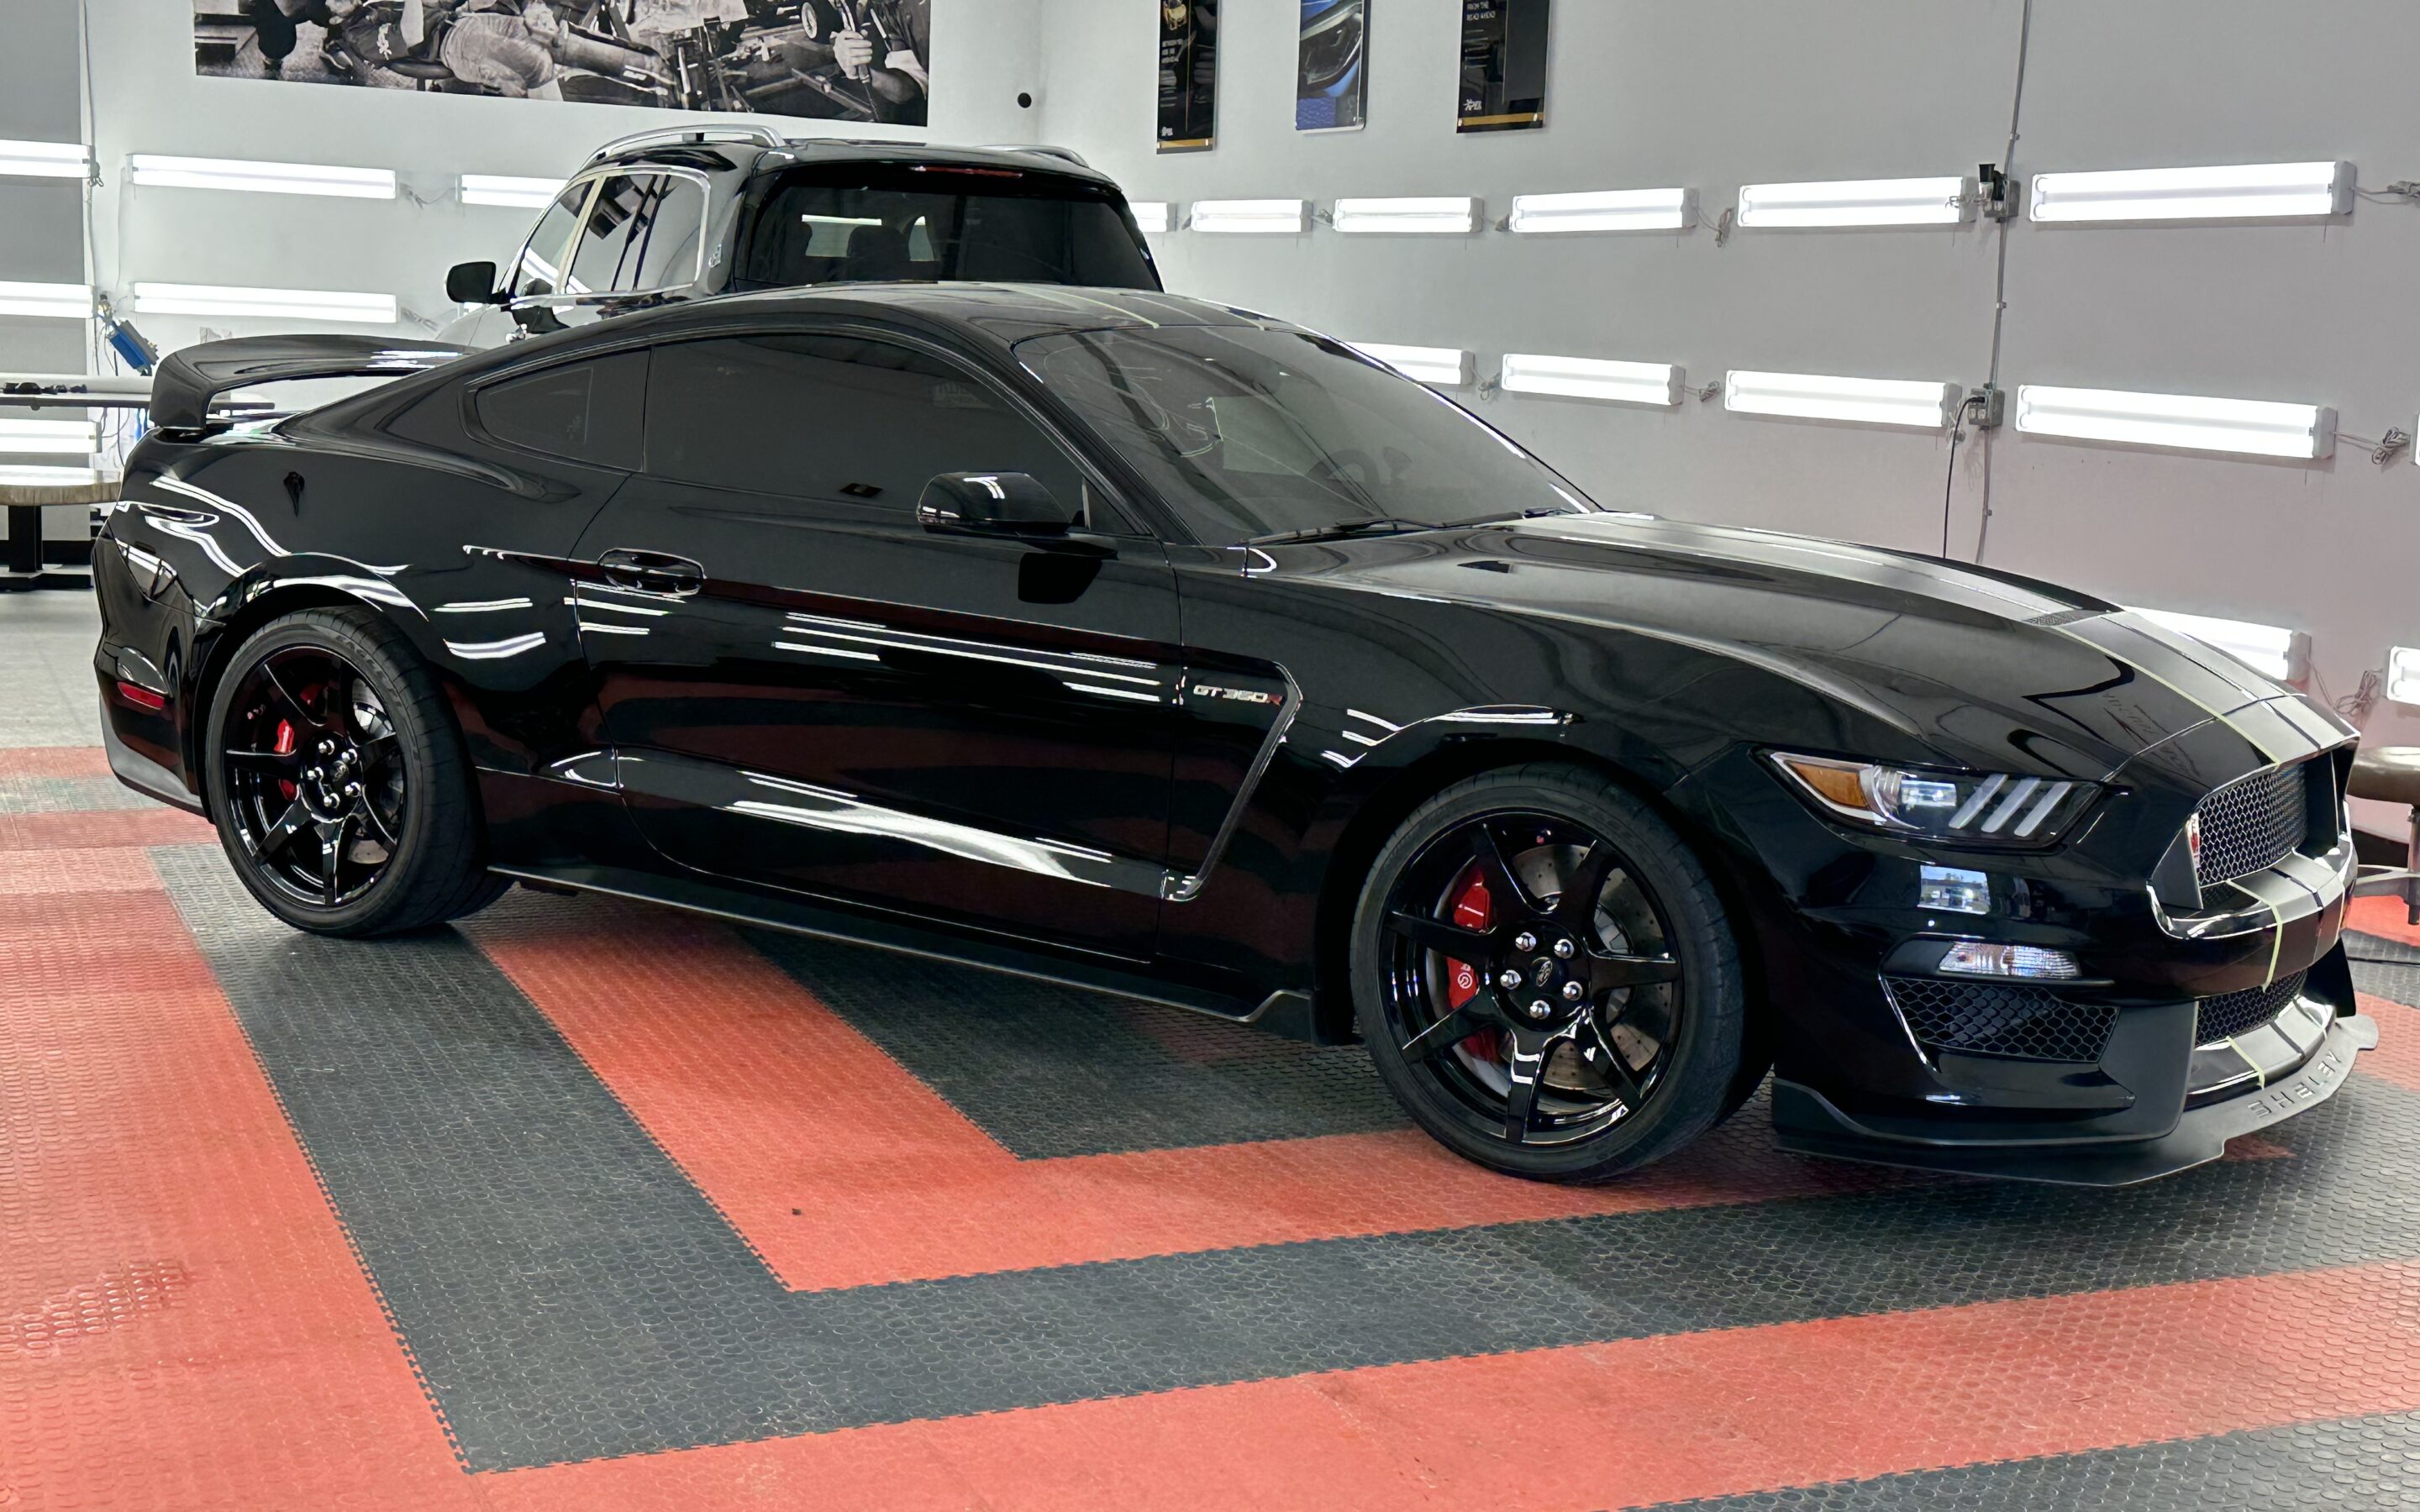 Ceramic Coating of a 2016 Ford Mustang